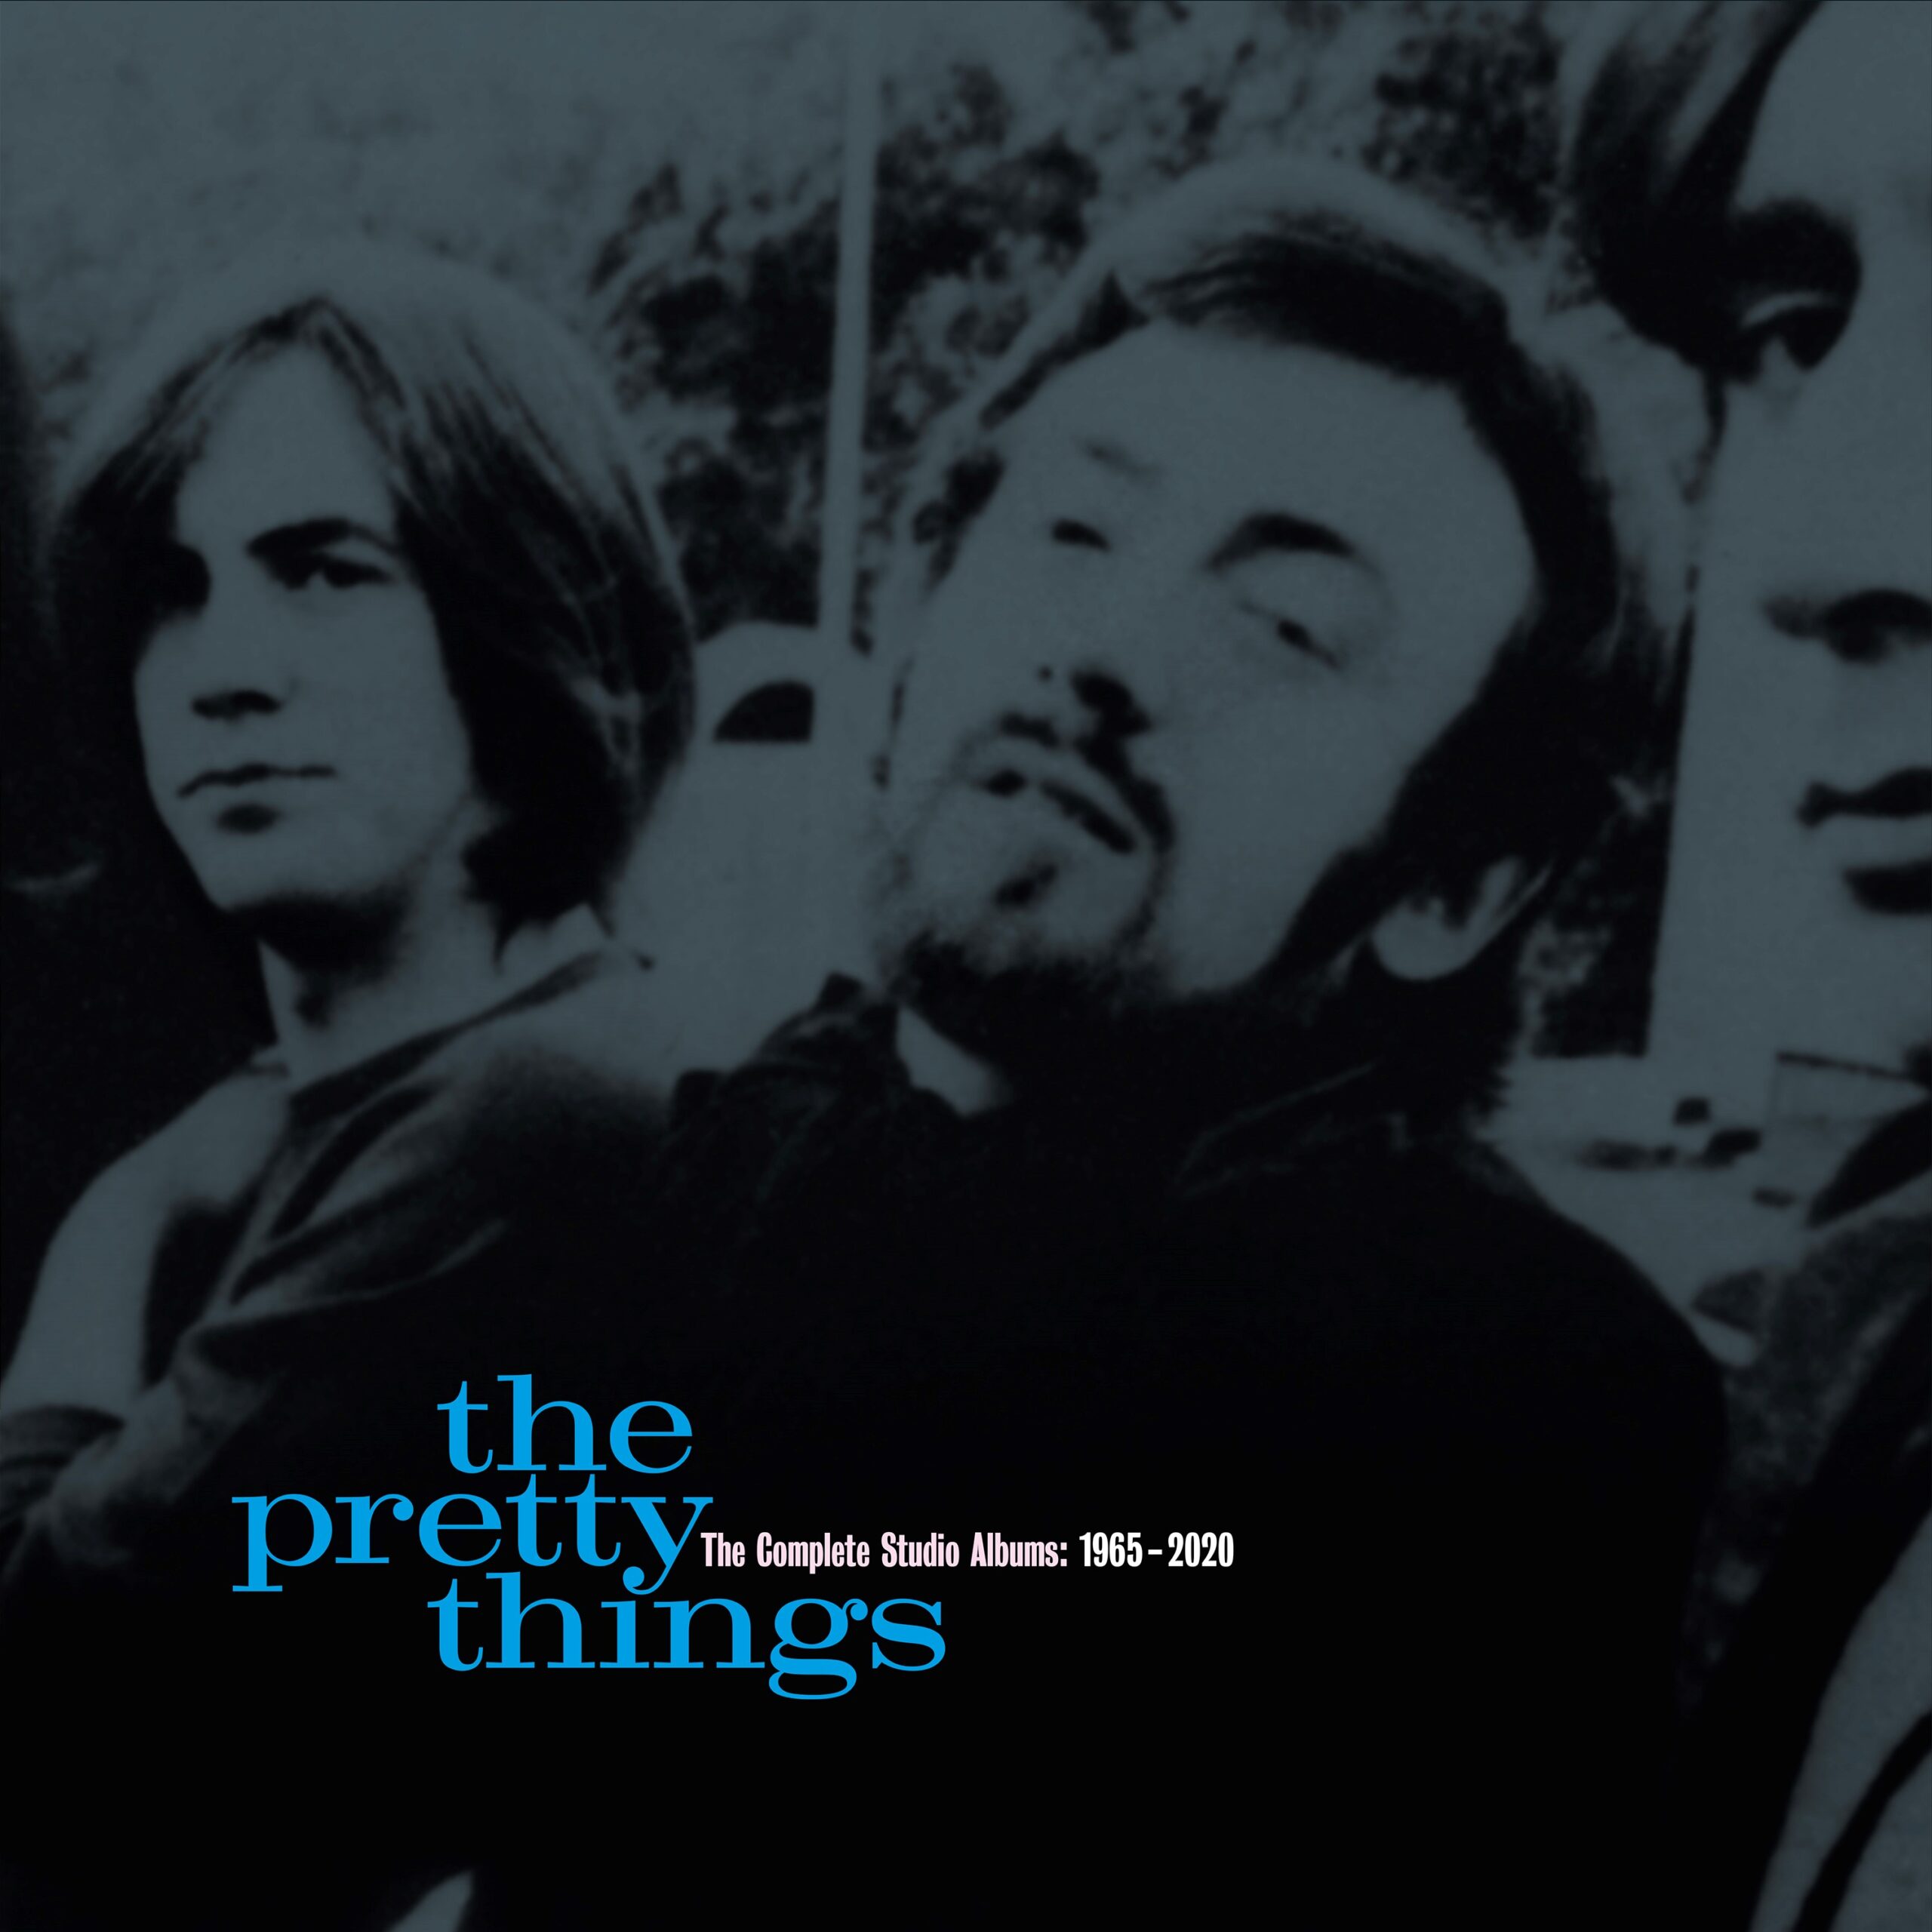 The pretty things Electric Banana. The pretty things - Greatest Hits 2017. Four Tops 1965 - second album. The be Bop Deluxe Singles as&BS.